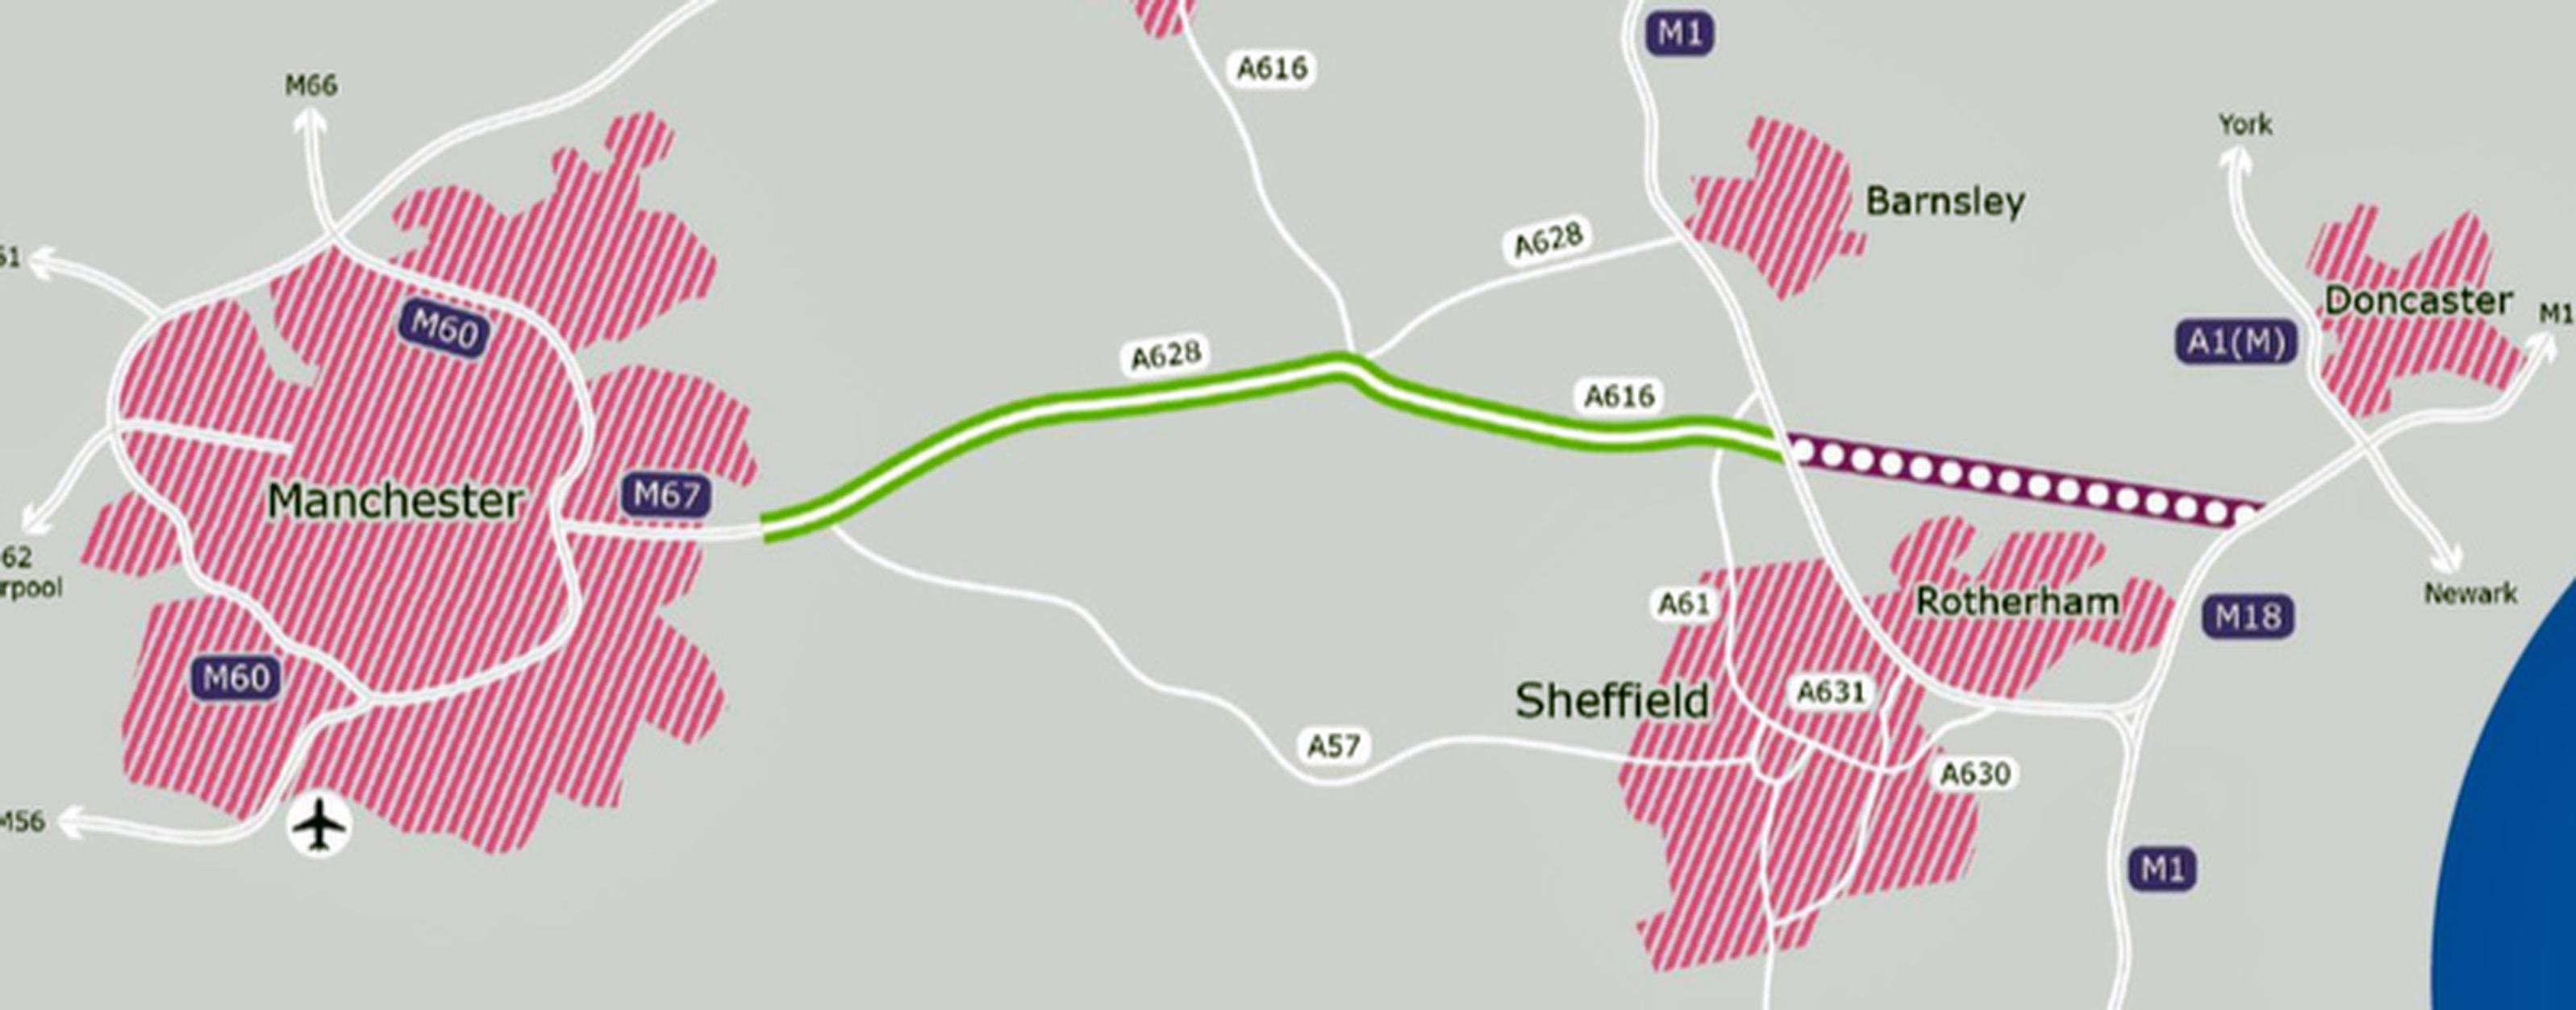 The A628 could form the core of a longer new route to the M18